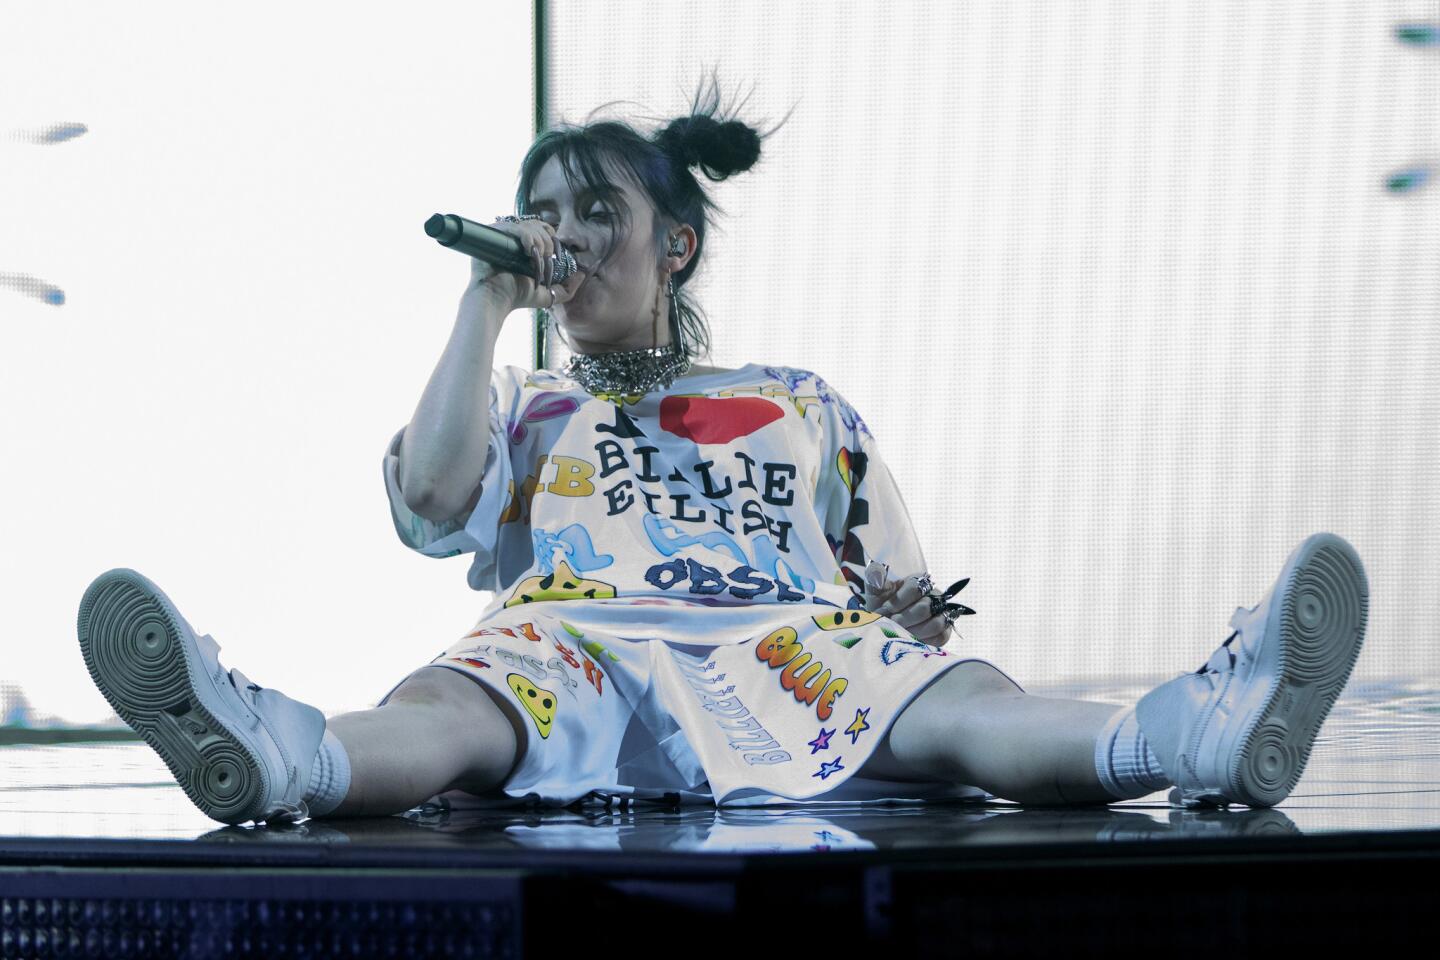 17-year-old Billie Eilish performs in front of a sold-out crowd Sunday, June 9, 2019, at the United Center in Chicago. (Erin Hooley/Chicago Tribune)